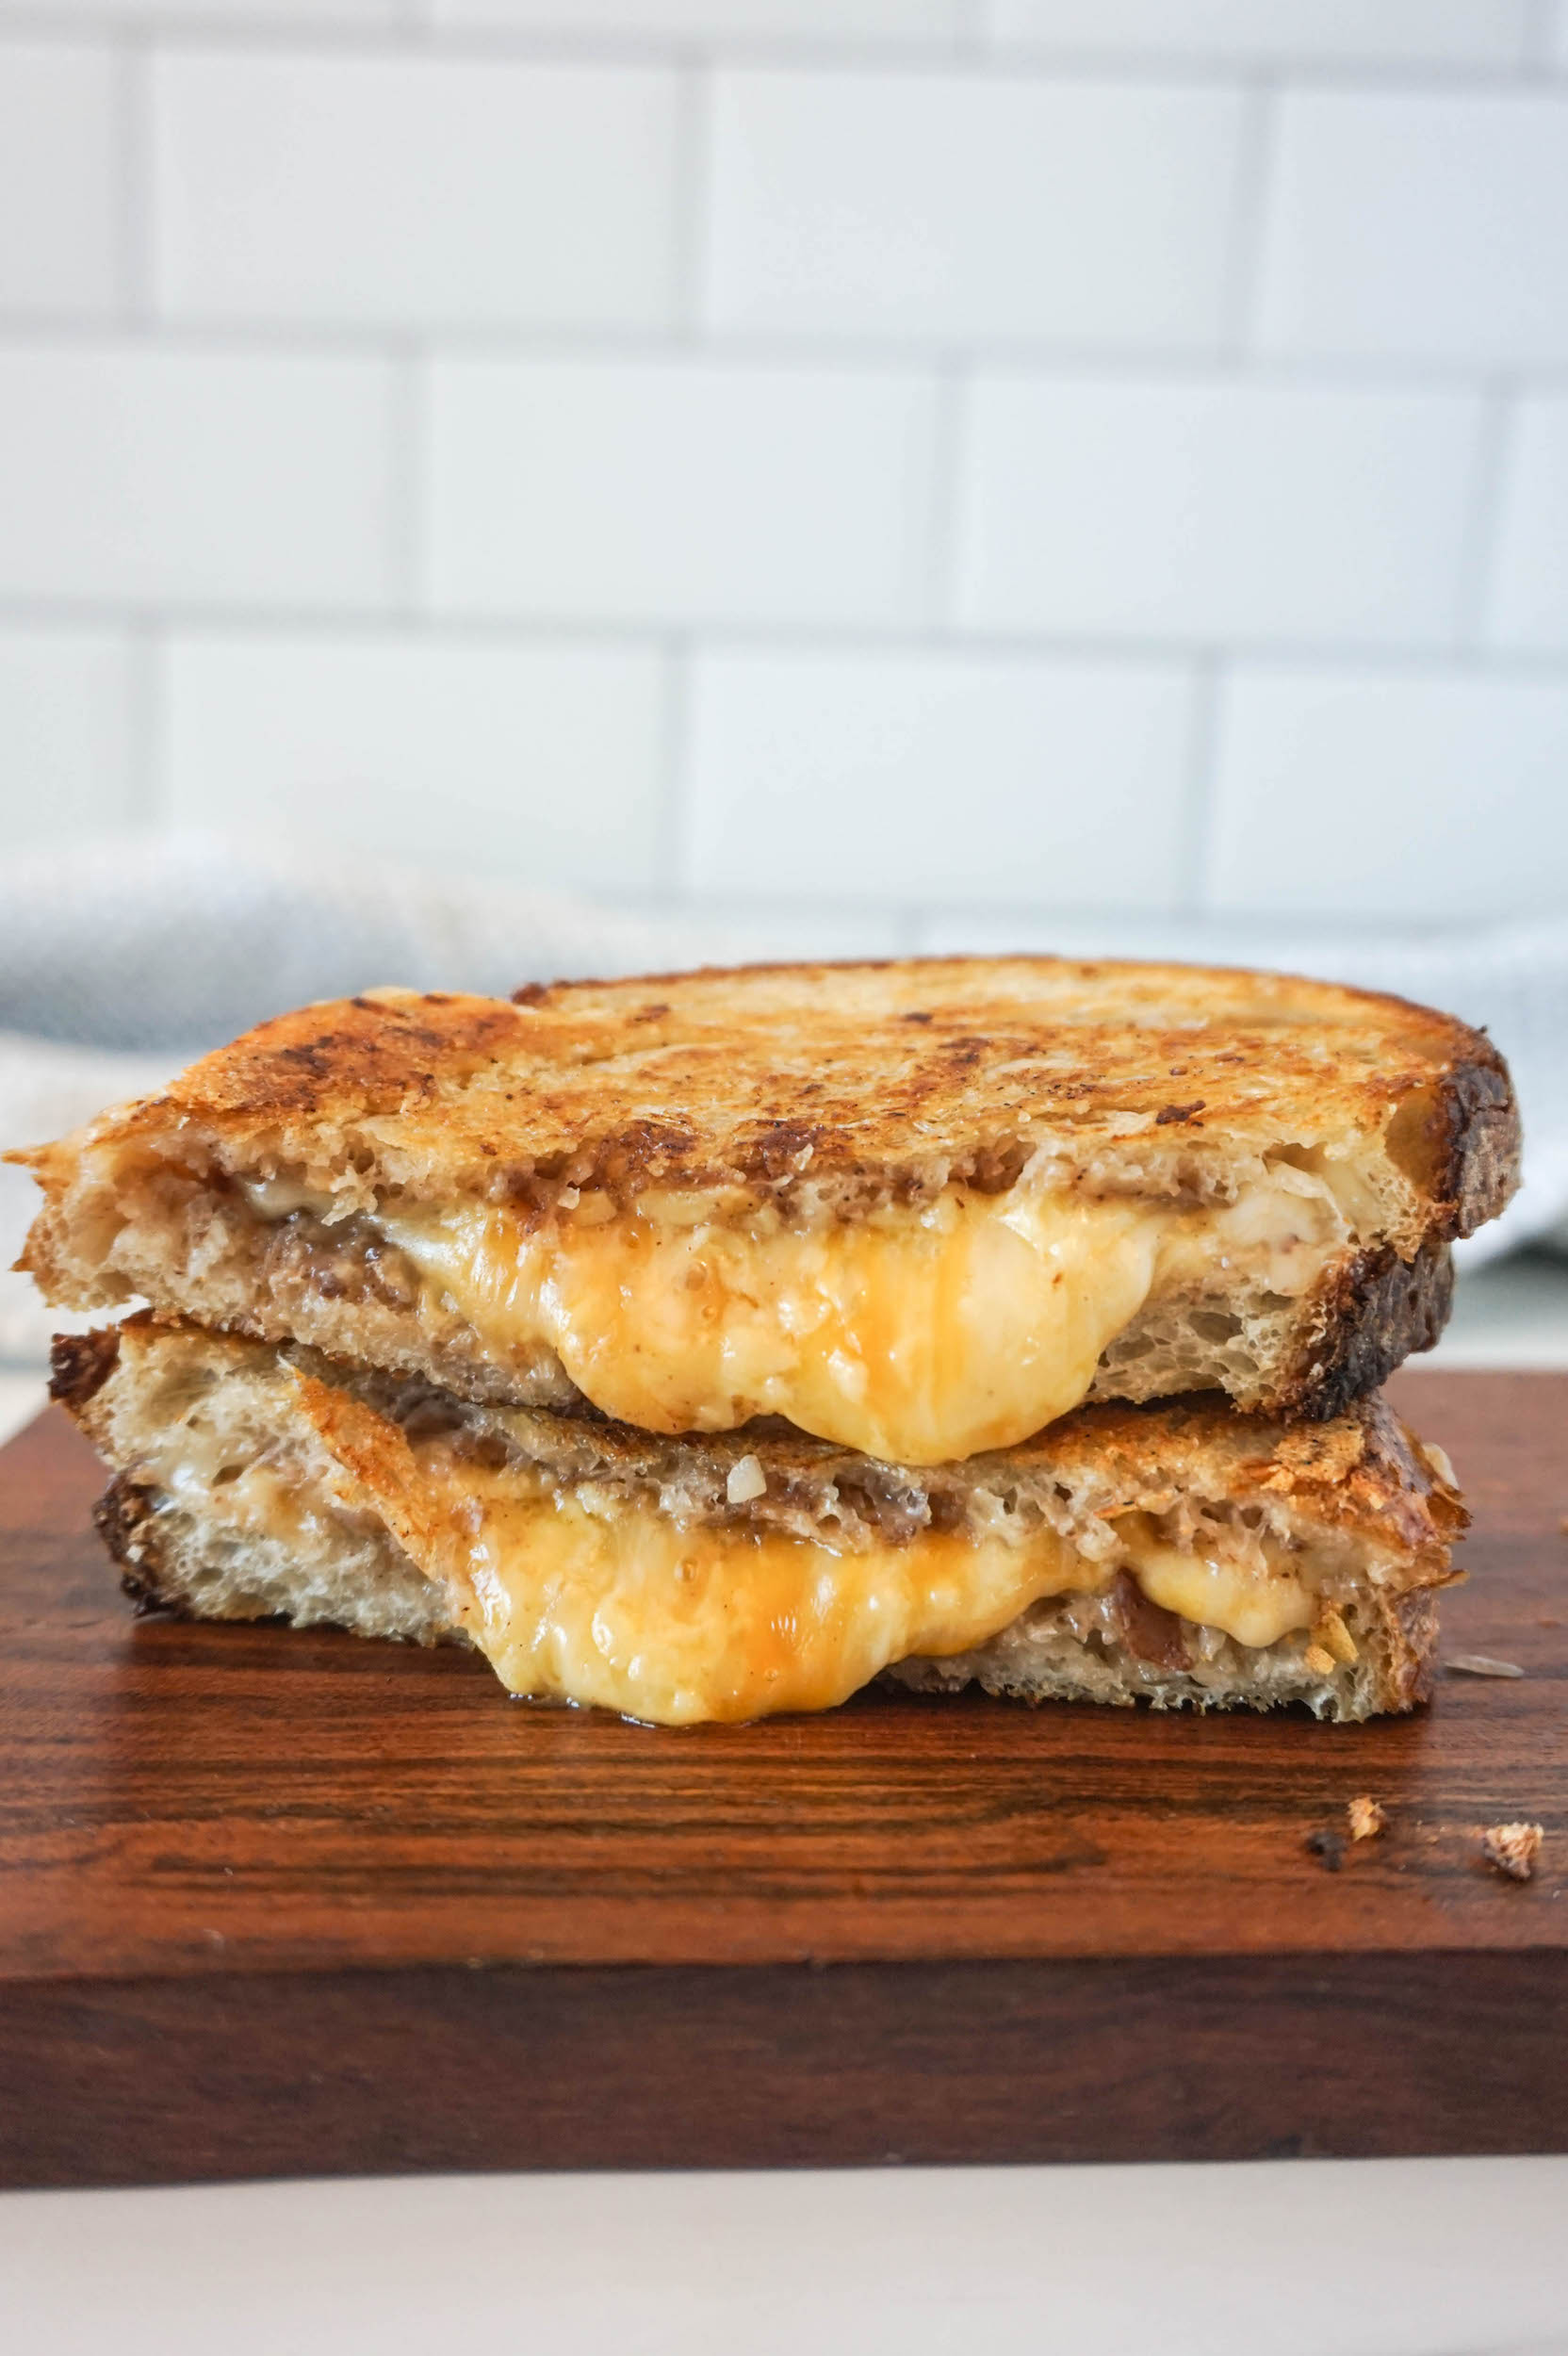 https://scratchmadesouthern.com/wp-content/uploads/2022/11/grilled-cheese-14.jpg